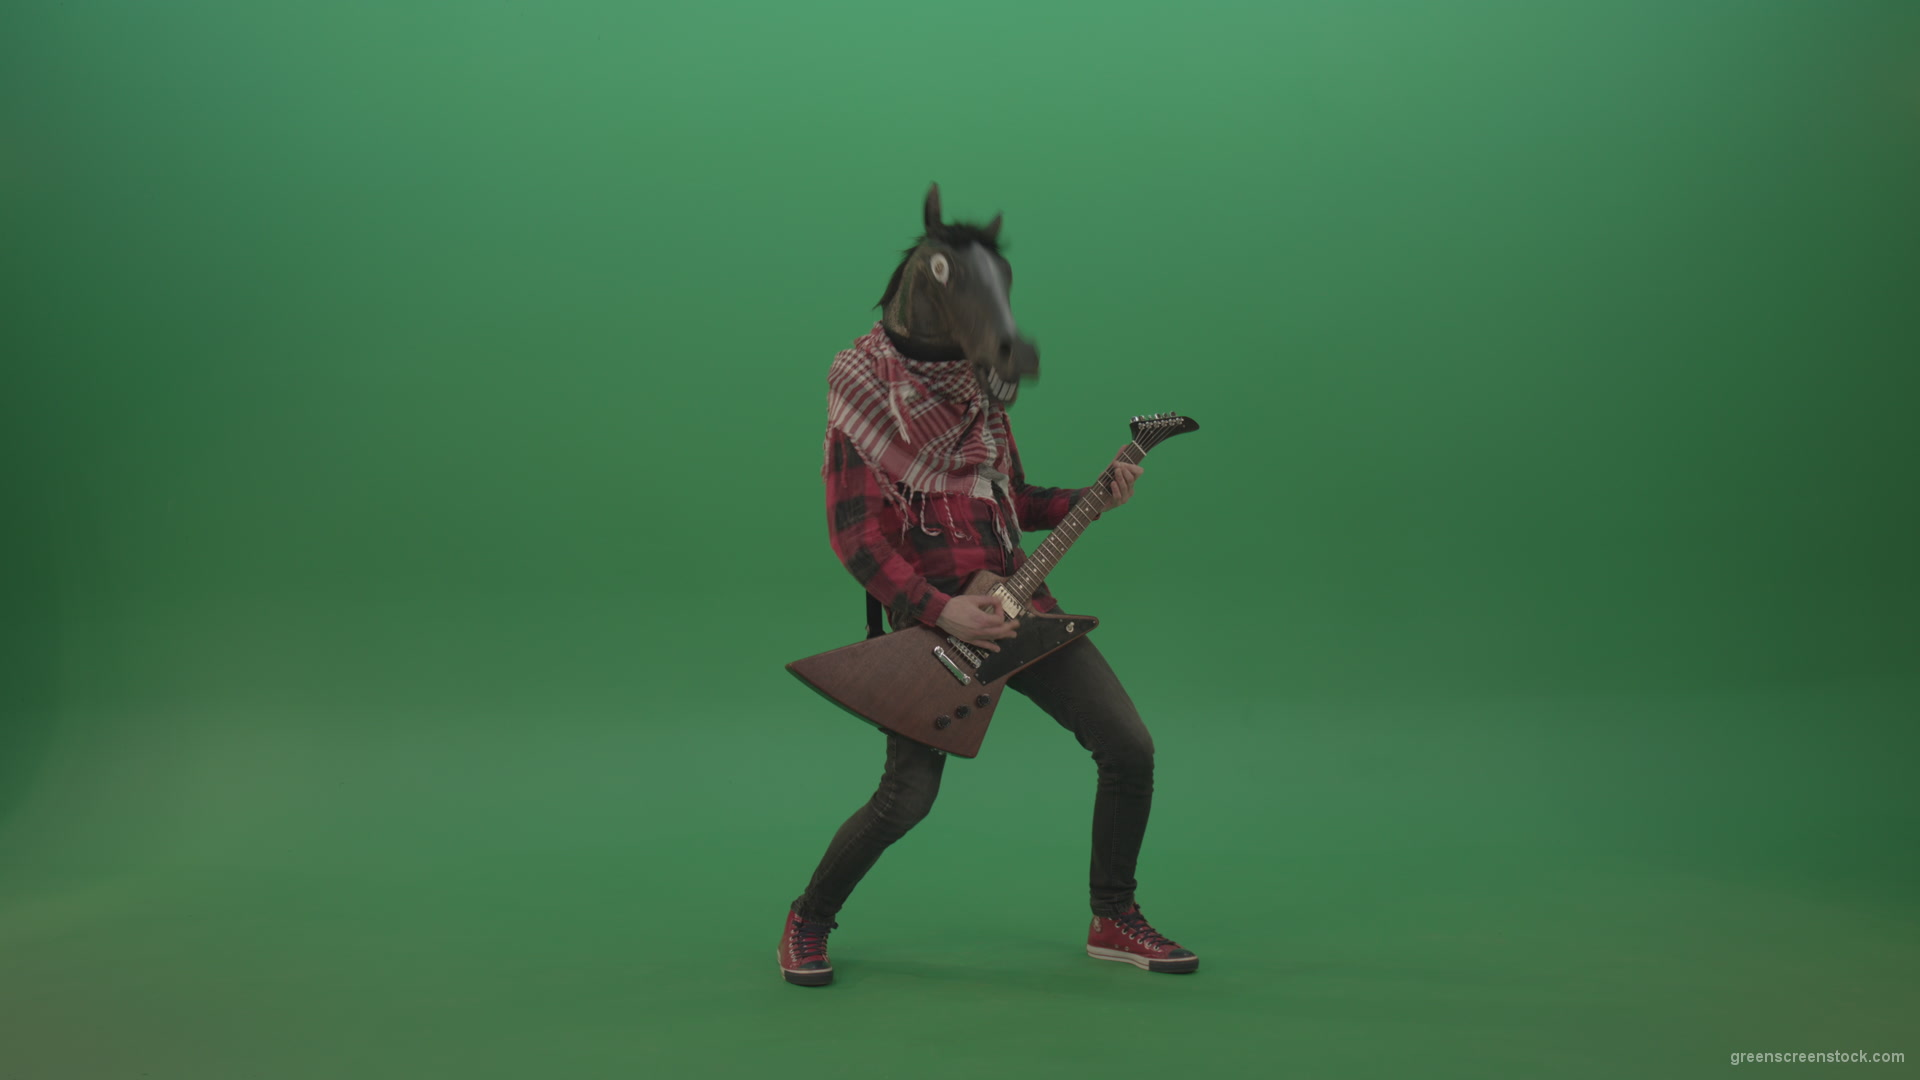 Green-screen-horse-man-guitaris-play-hard-rock-music-with-guitar-isolated-on-green-background_009 Green Screen Stock